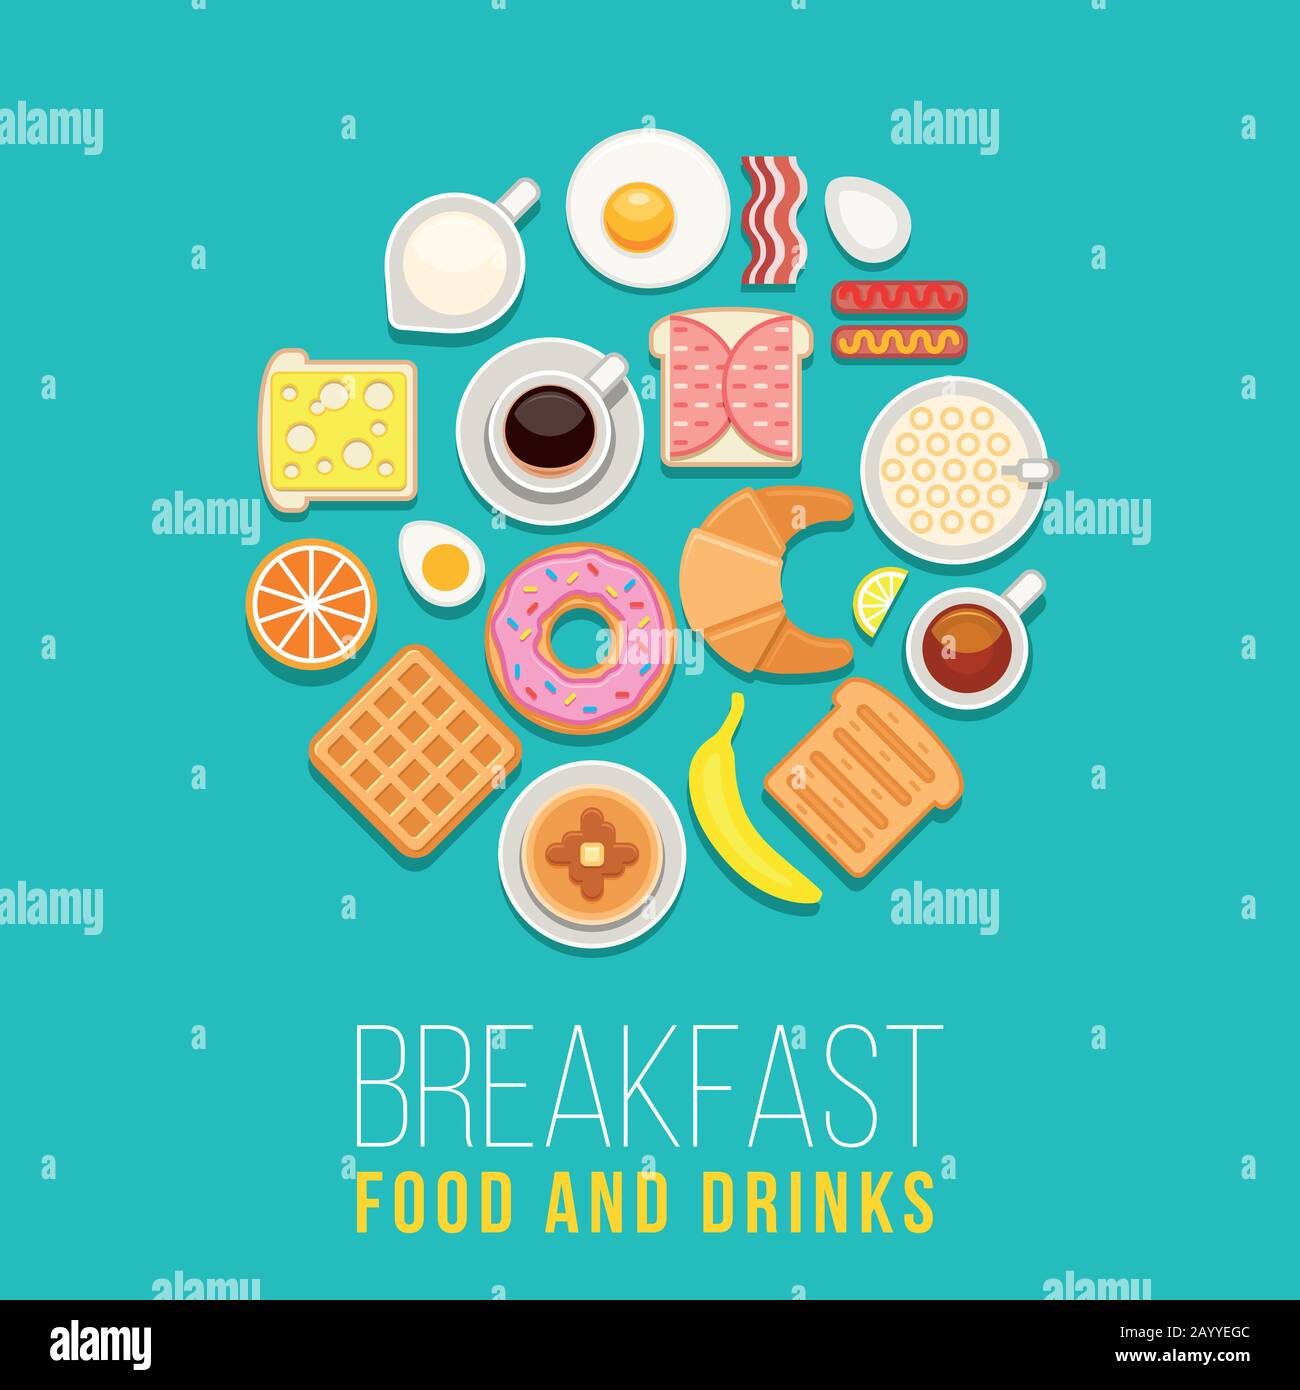 Vector breakfast concept with food and drinks with flat icons in circle composition. Breakfast composition sandwich and omelette, breakfast food bakery illustration Stock Vector